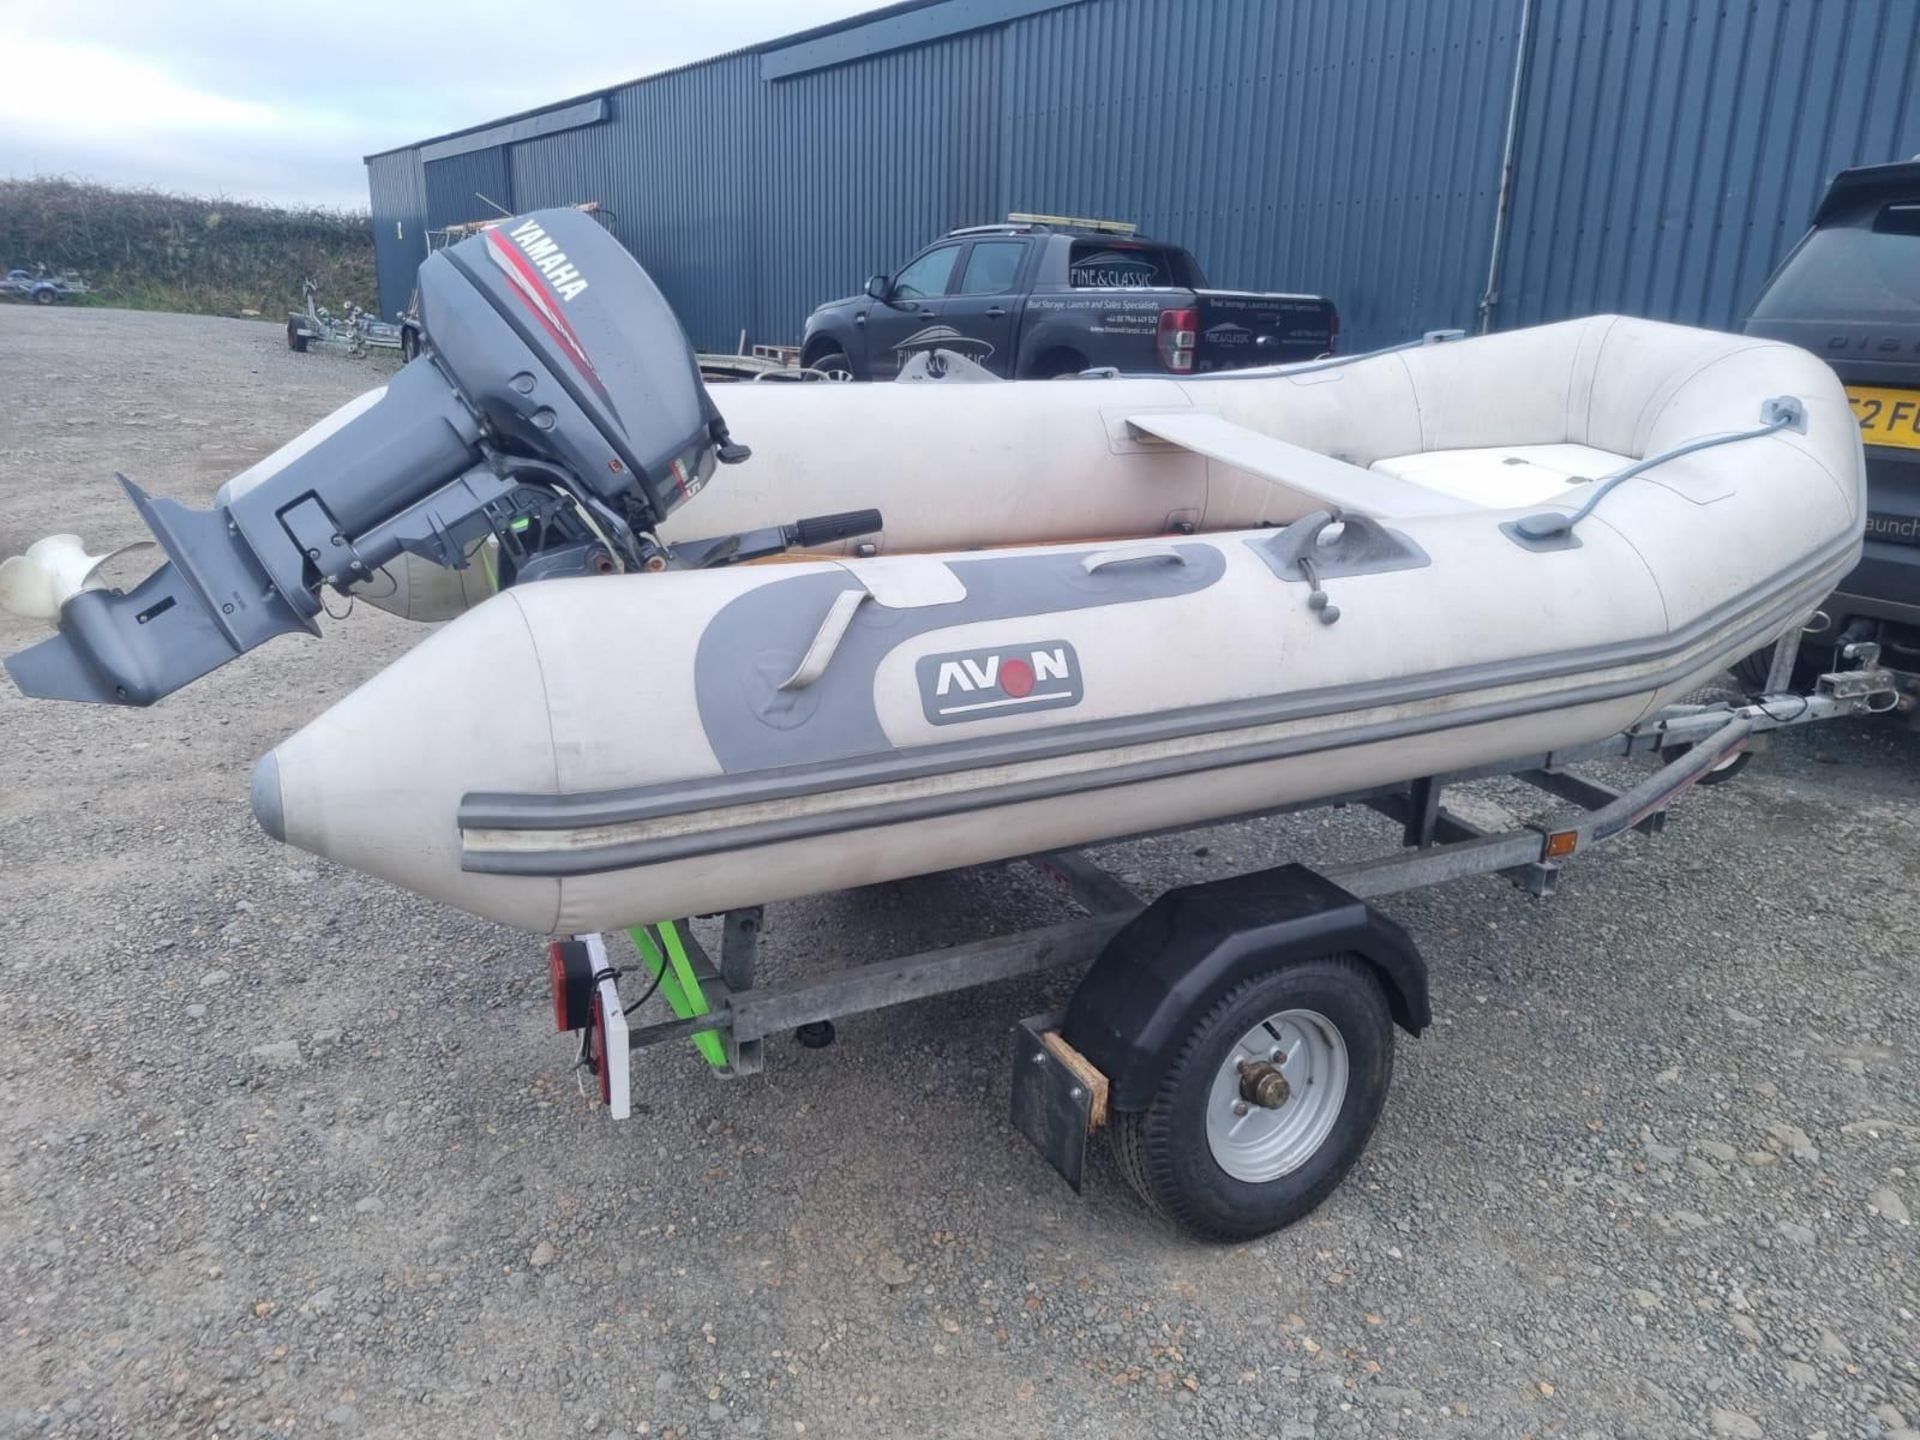 2004 Avon rigid inflatable boat with 2004 Yamaha 15HP two stroke outboard engine. - Image 2 of 7